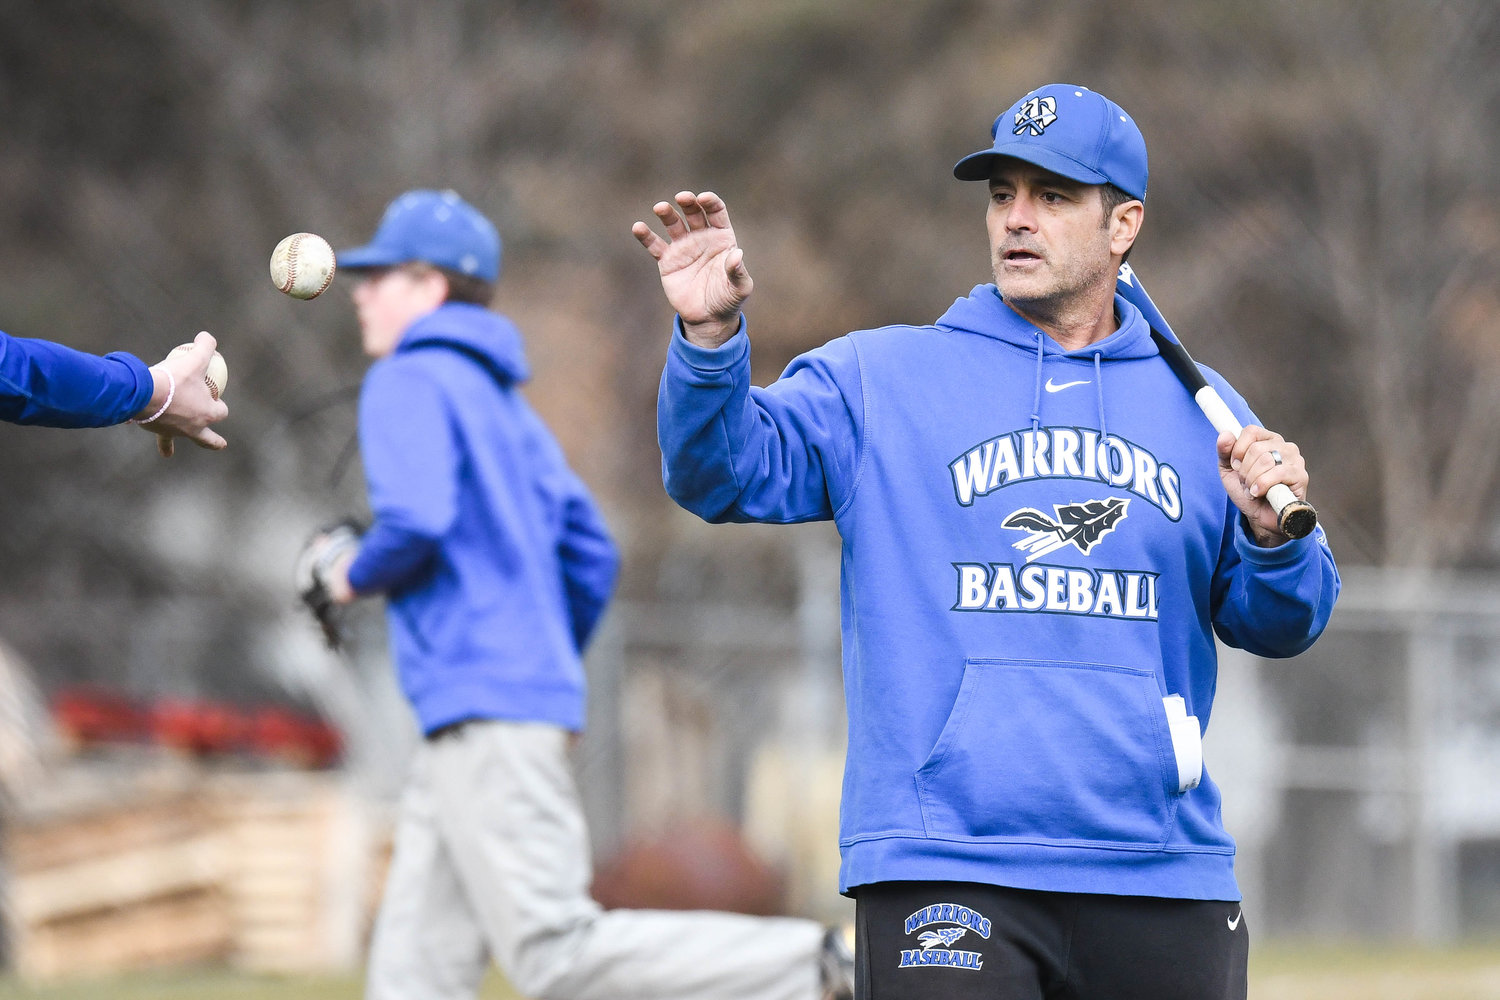 PREPARING THE TEAM — Whitesboro head coach Tom Maggiolino hits fly balls for his players during practice on Tuesday.